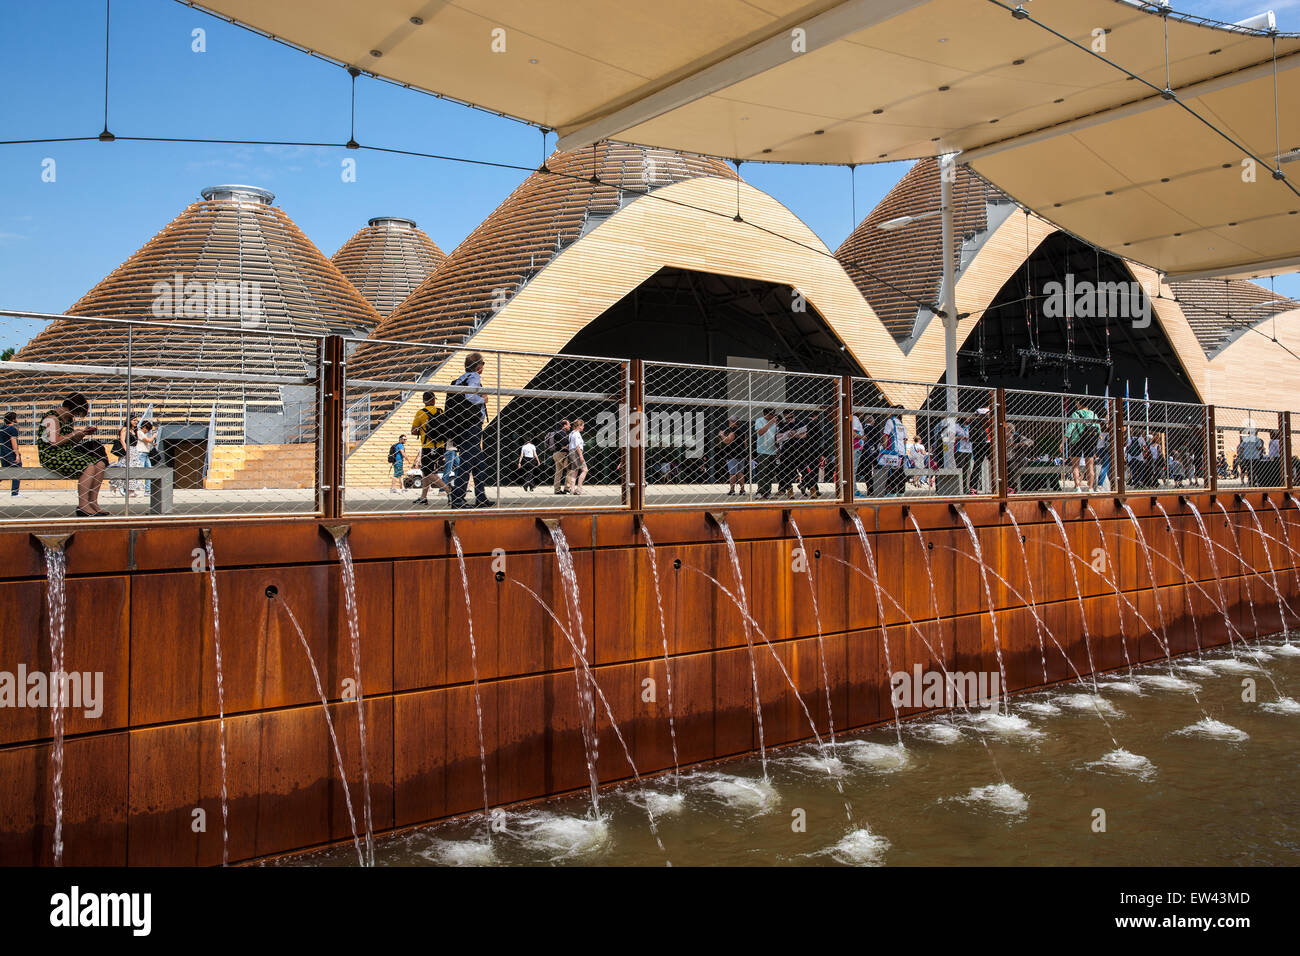 Milan Expo 2015, food, architecture, pavilion, people, structure, Stock Photo